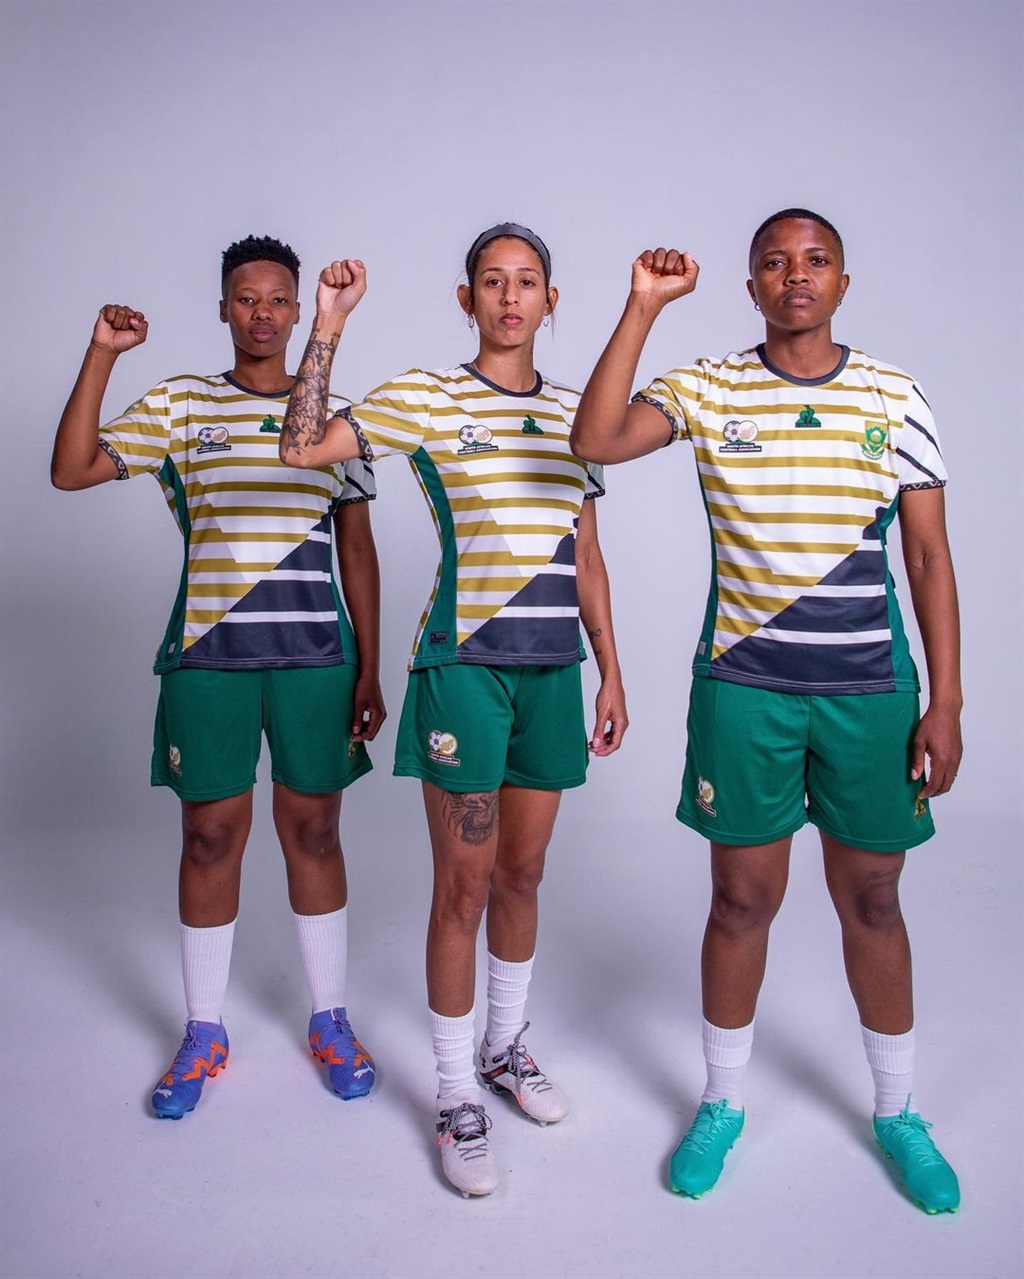 The new SAFA national team kits manufactured by Le